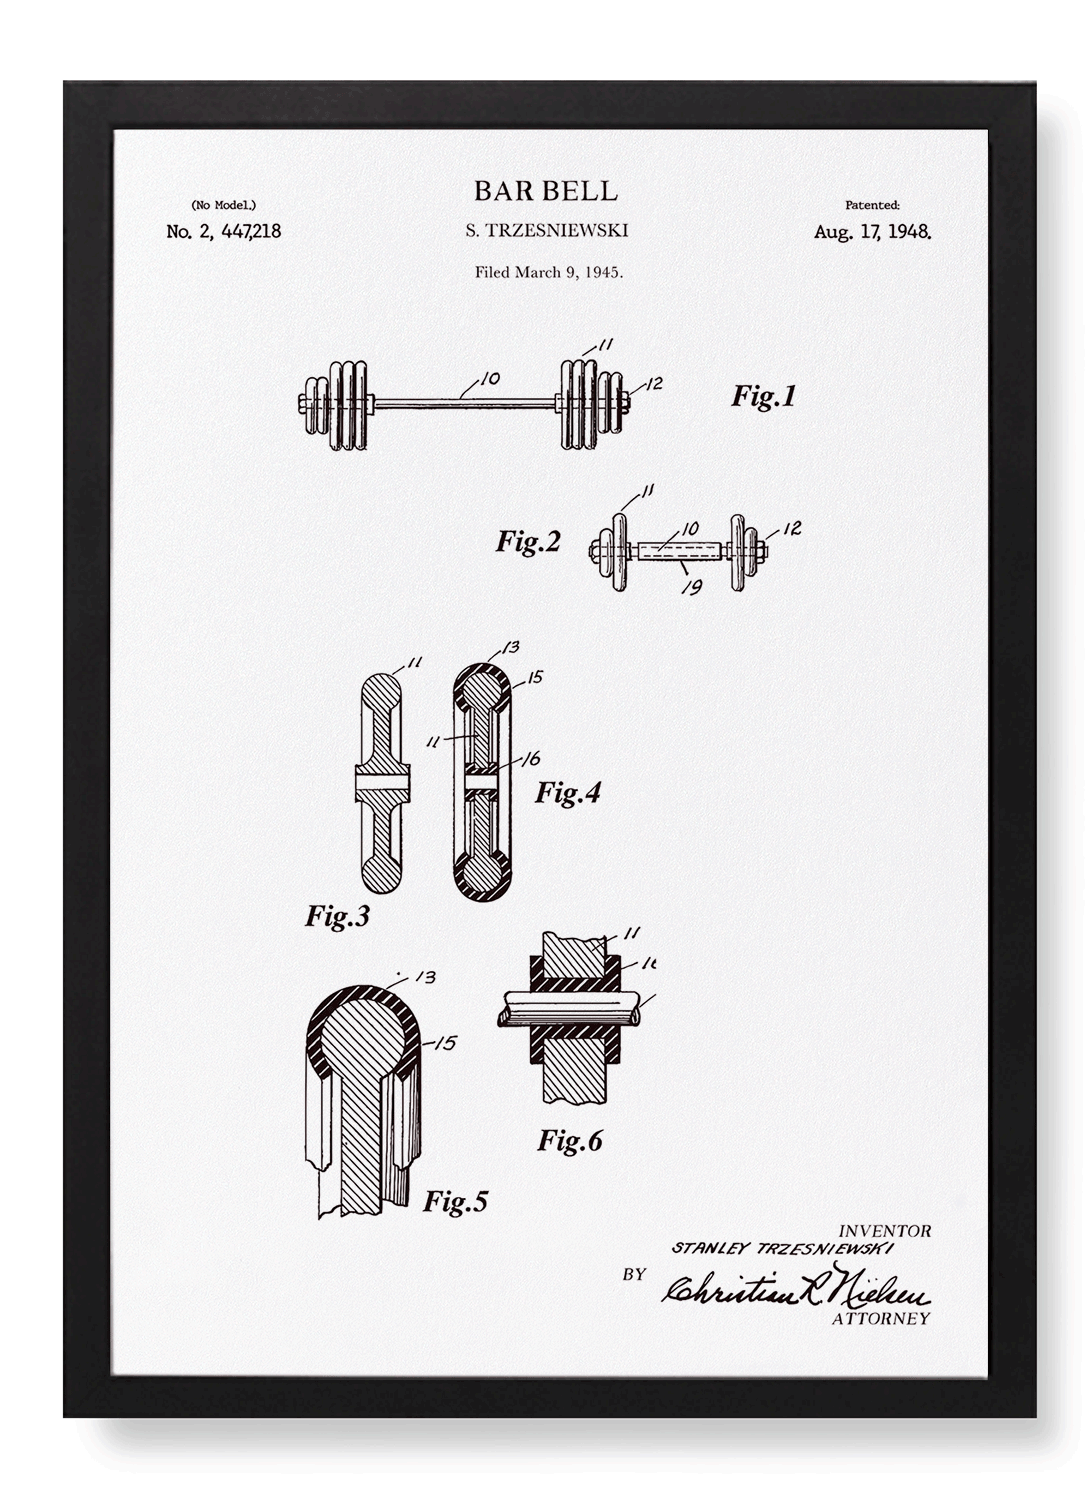 PATENT OF BARBELL  (1948)